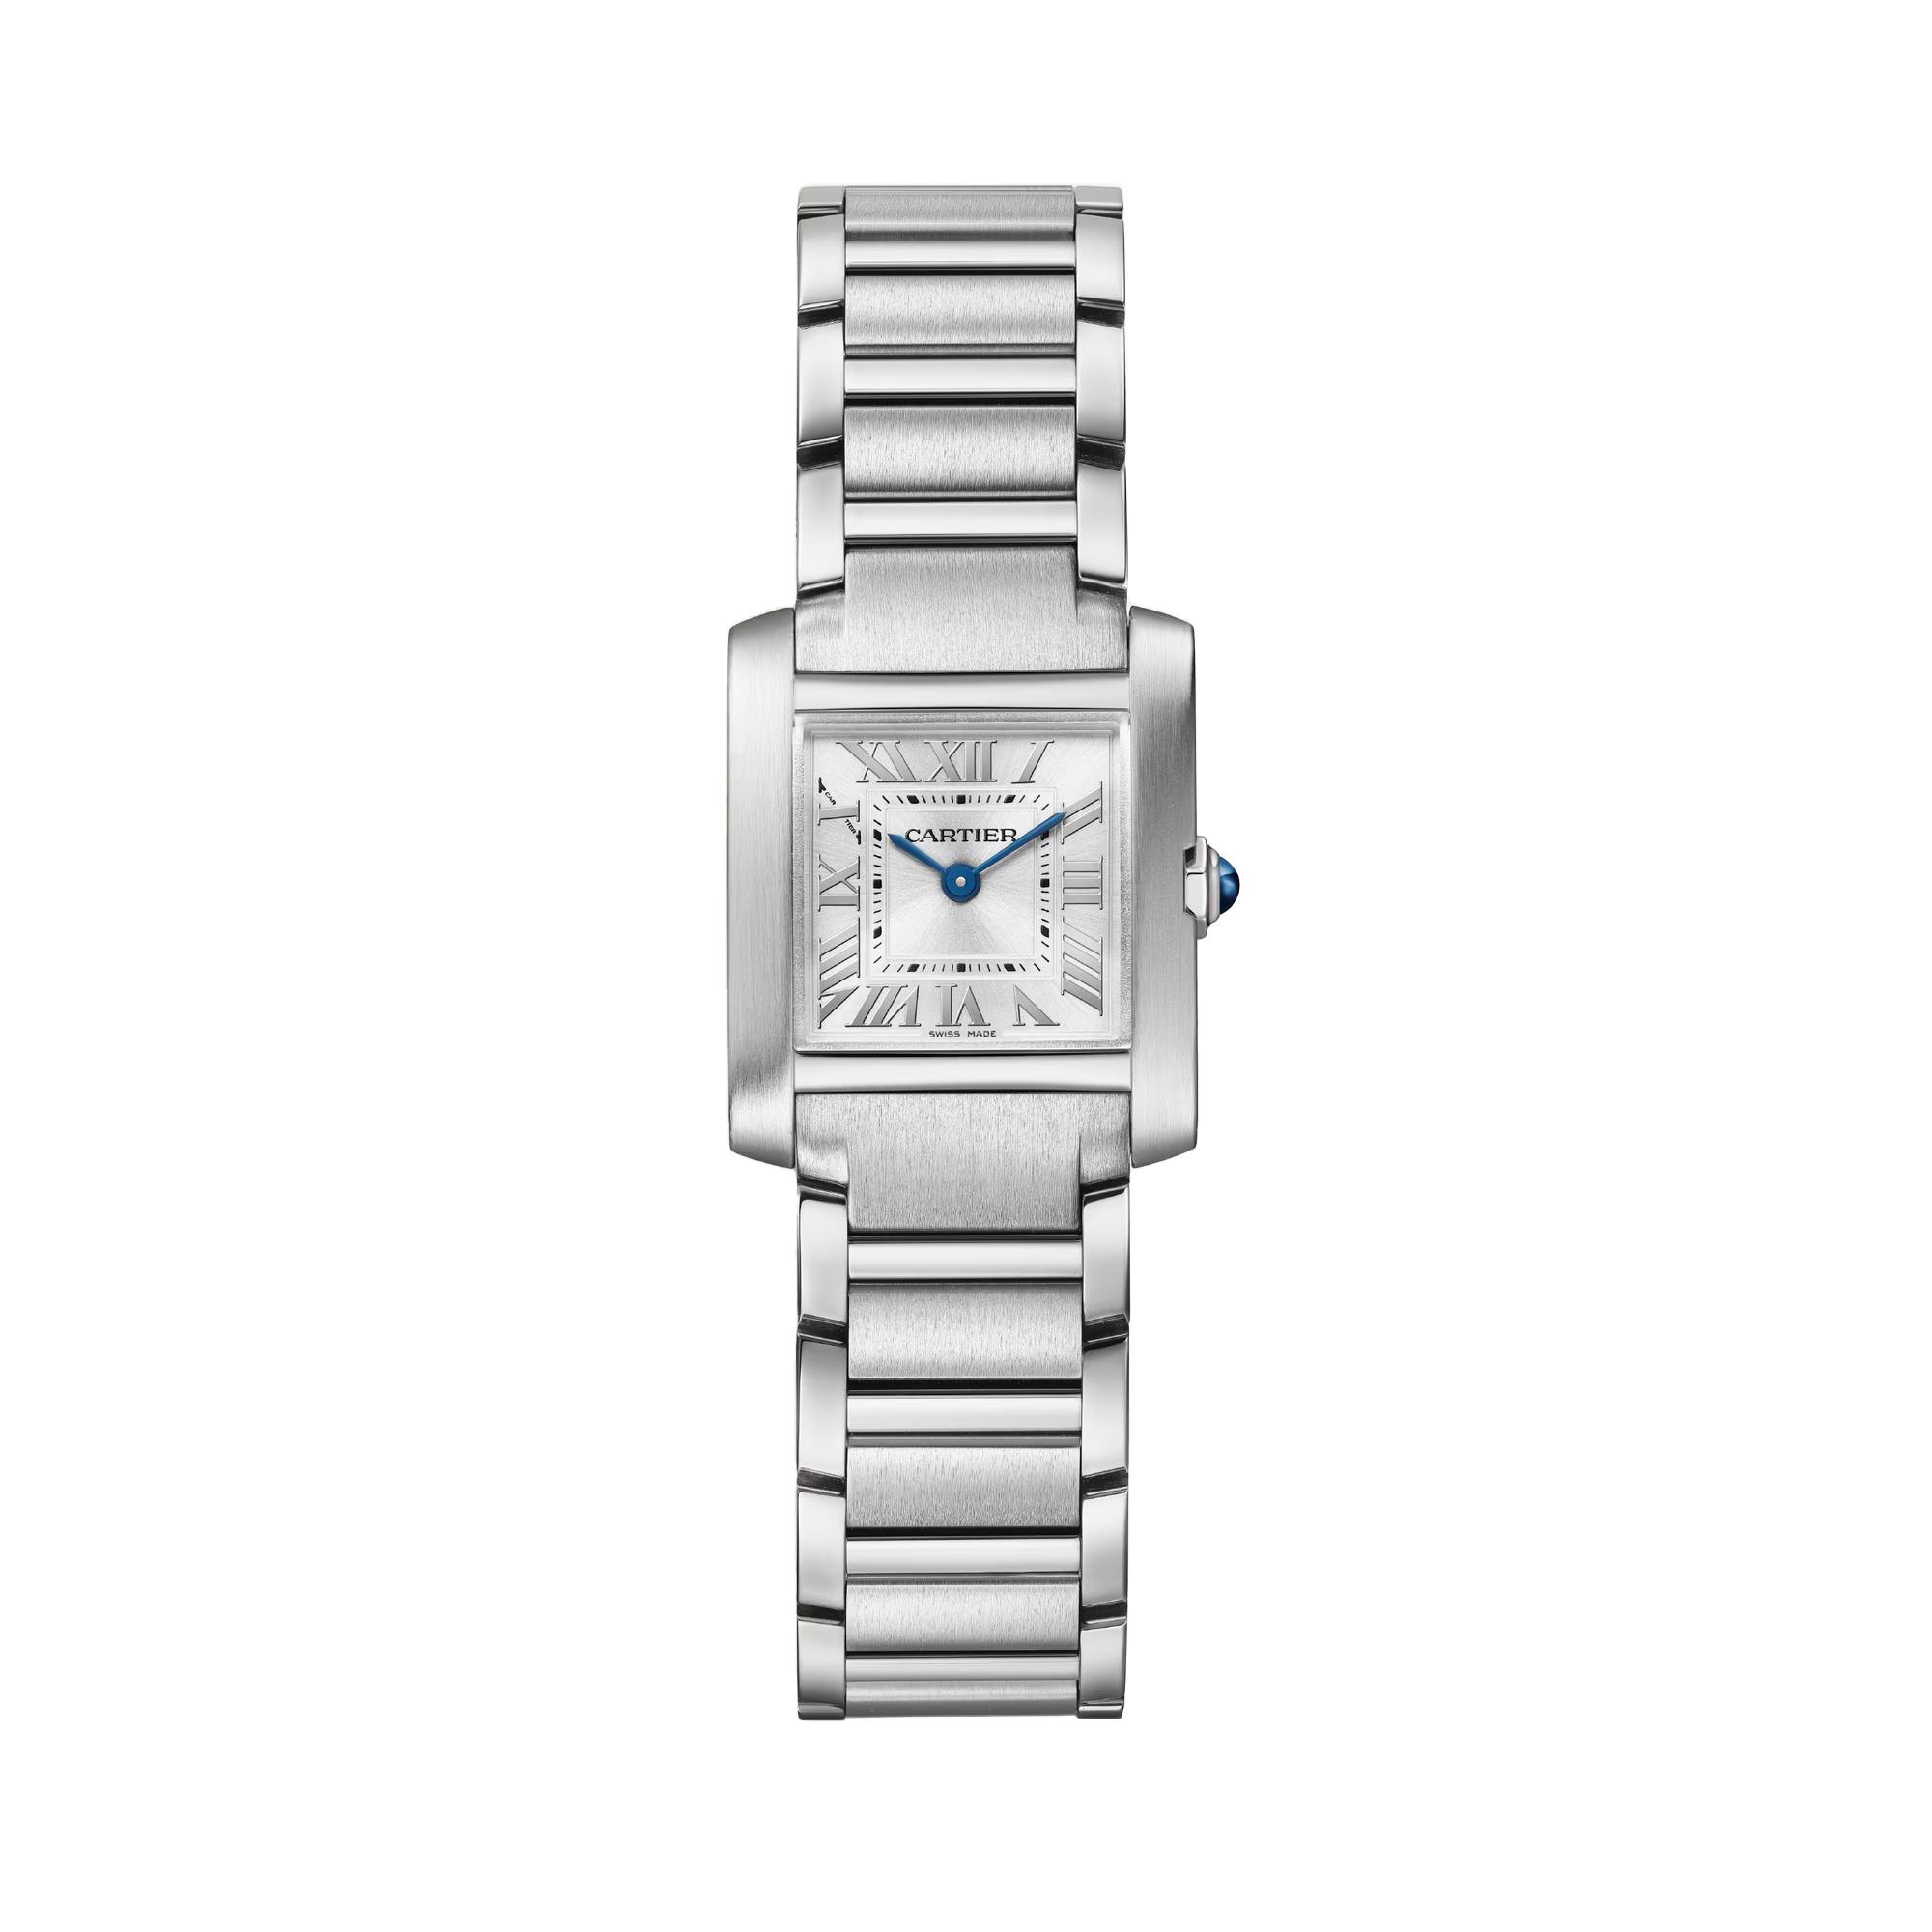 Cartier Tank Francaise Watch, small model